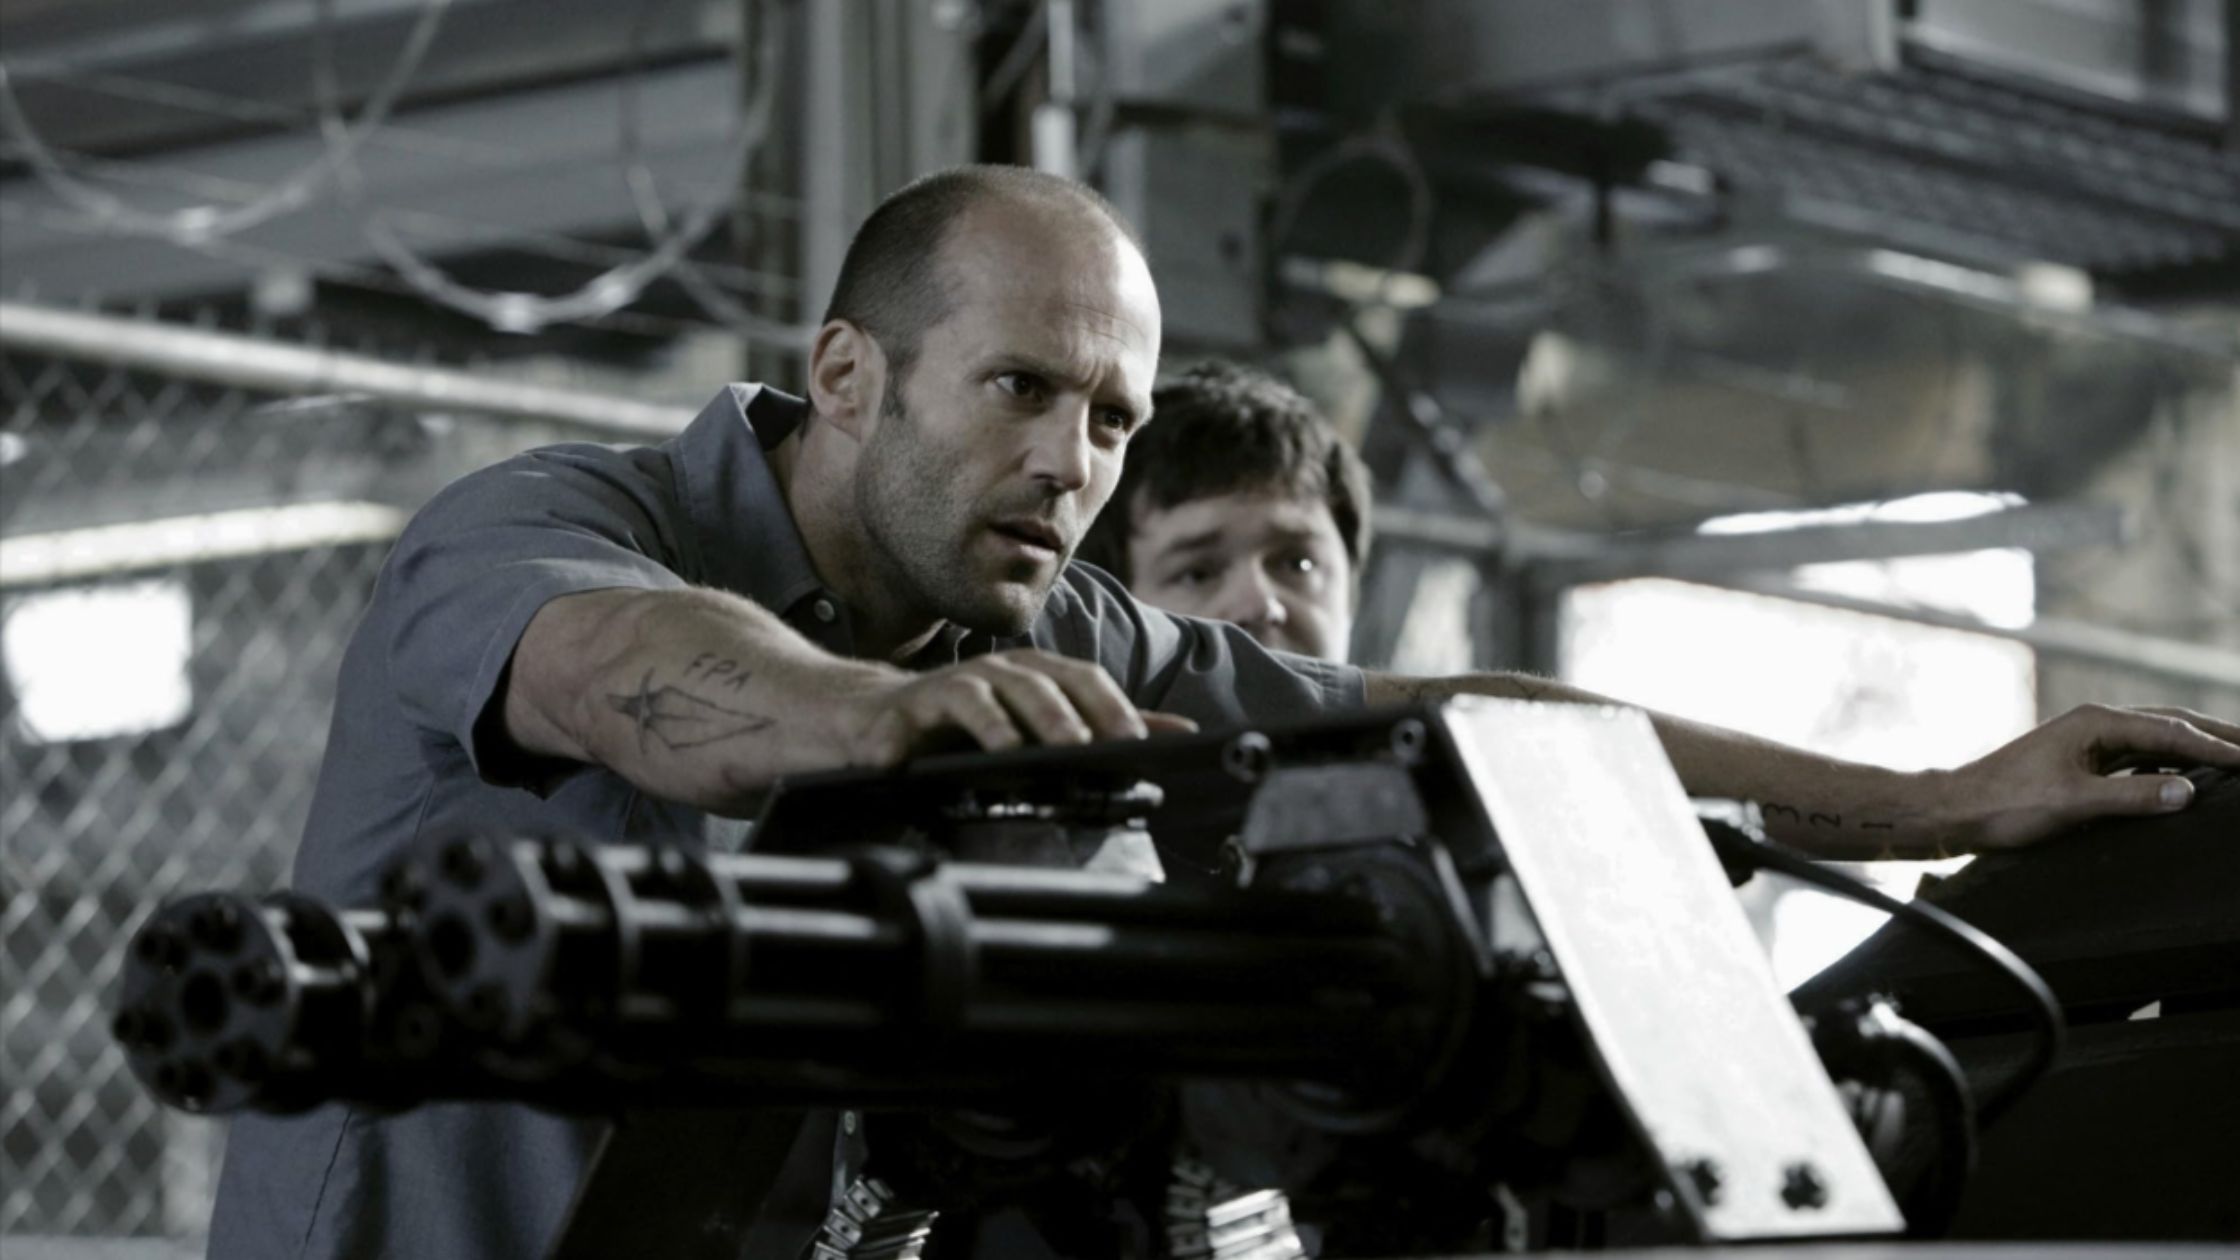 A scene of Jason Statham from the film Death Race.